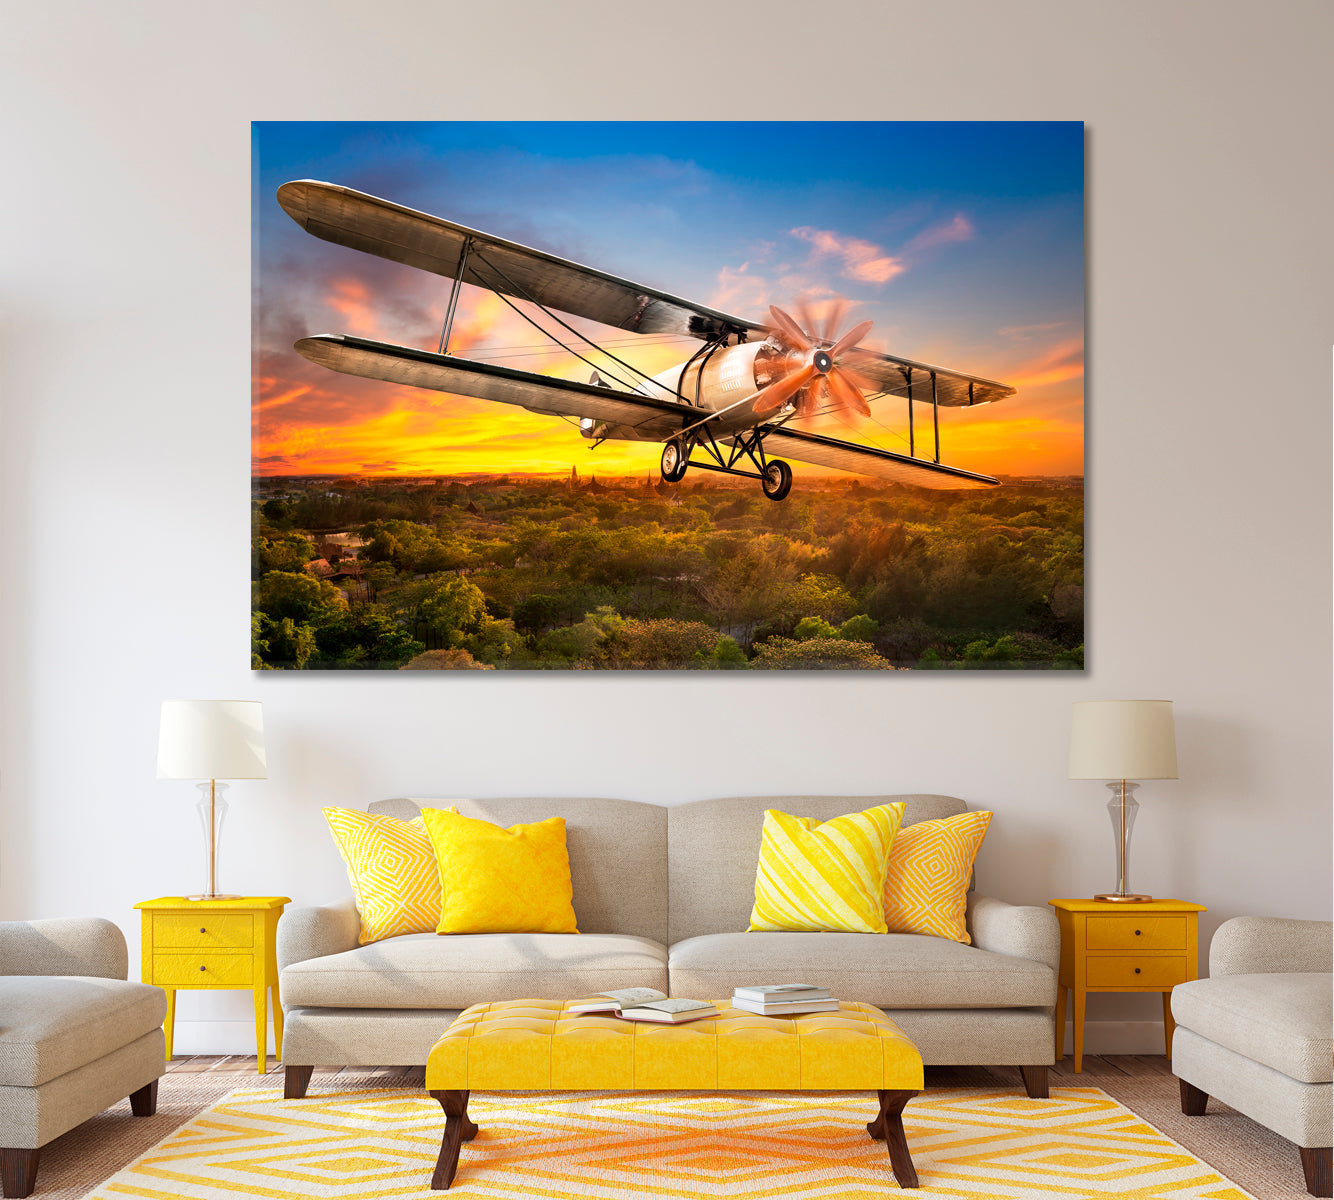 Biplane Flying Over Trees Canvas Print ArtLexy 1 Panel 24"x16" inches 